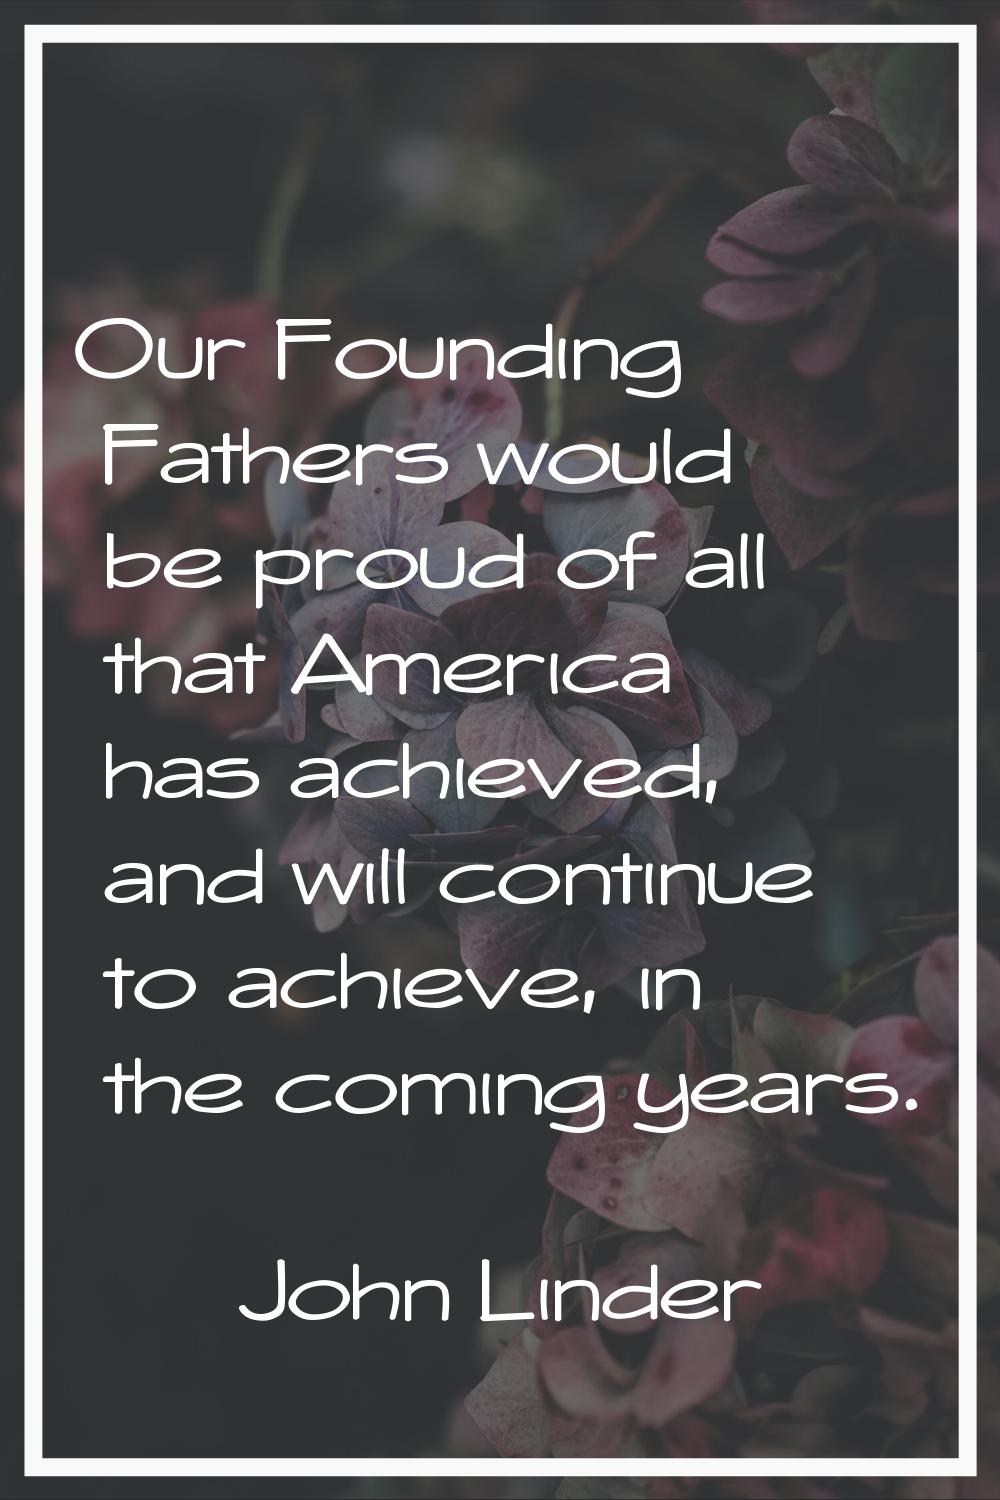 Our Founding Fathers would be proud of all that America has achieved, and will continue to achieve,